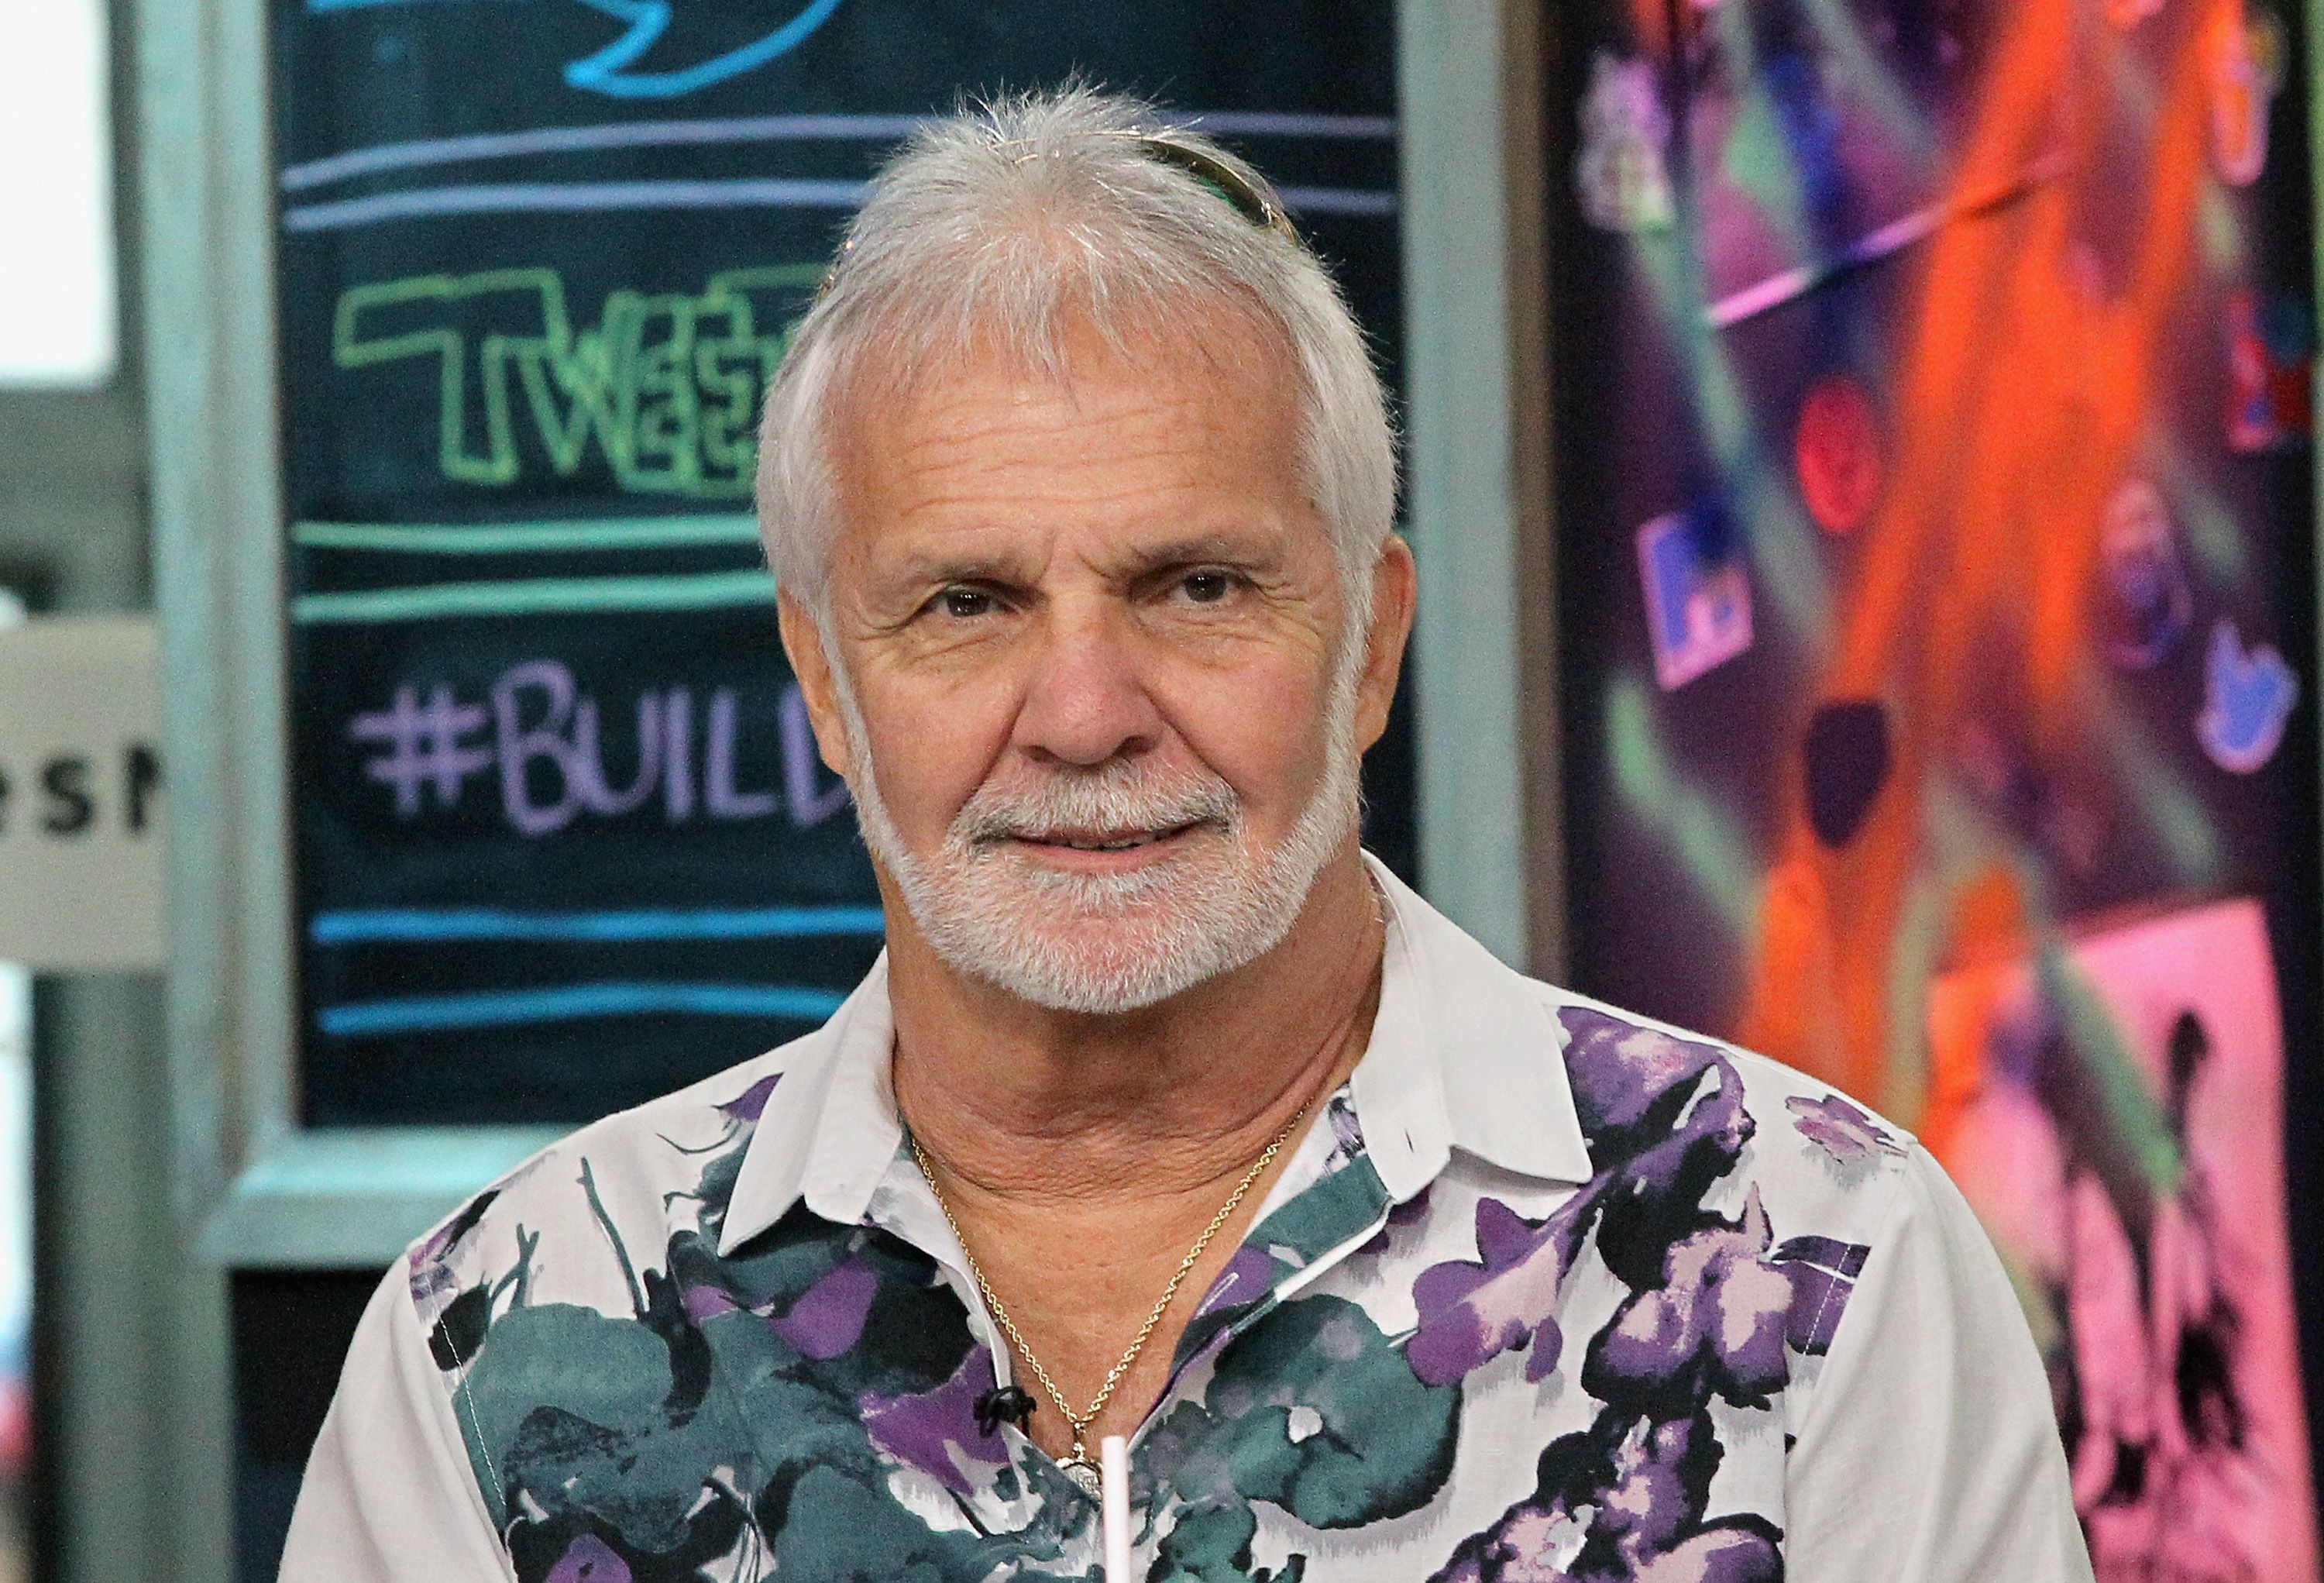 Captain Lee Rosbach at the Build Brunch to discuss "Below Deck" 2 at Build Studio on October 3, 2018 | Photo: Getty Images